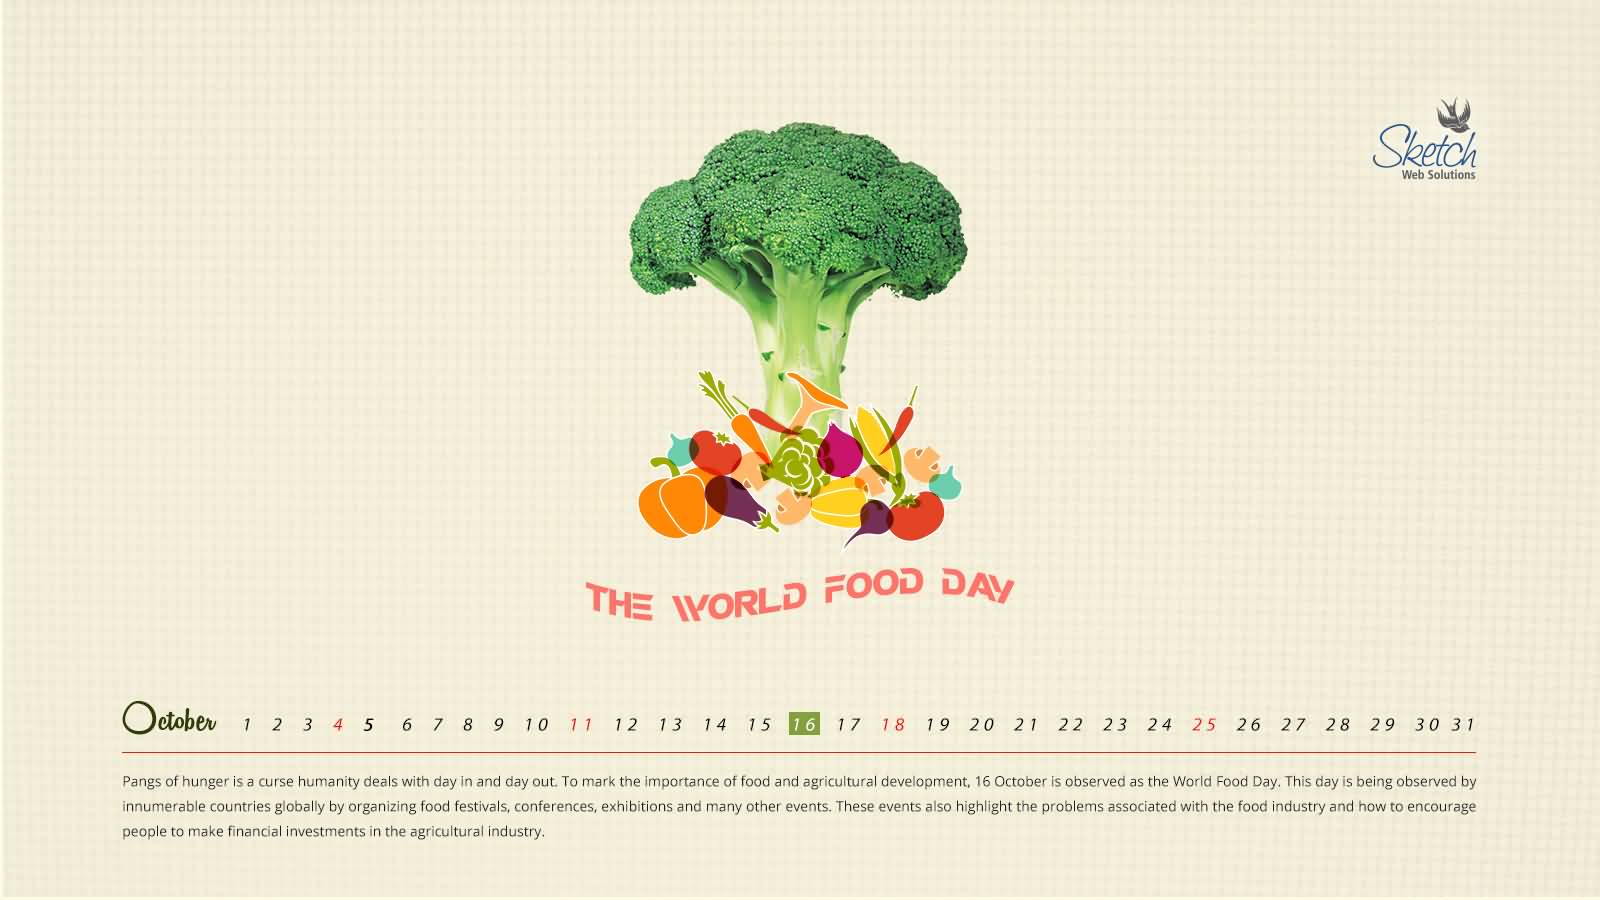 The World Food Day 16 October, 2016 Calendar Picture